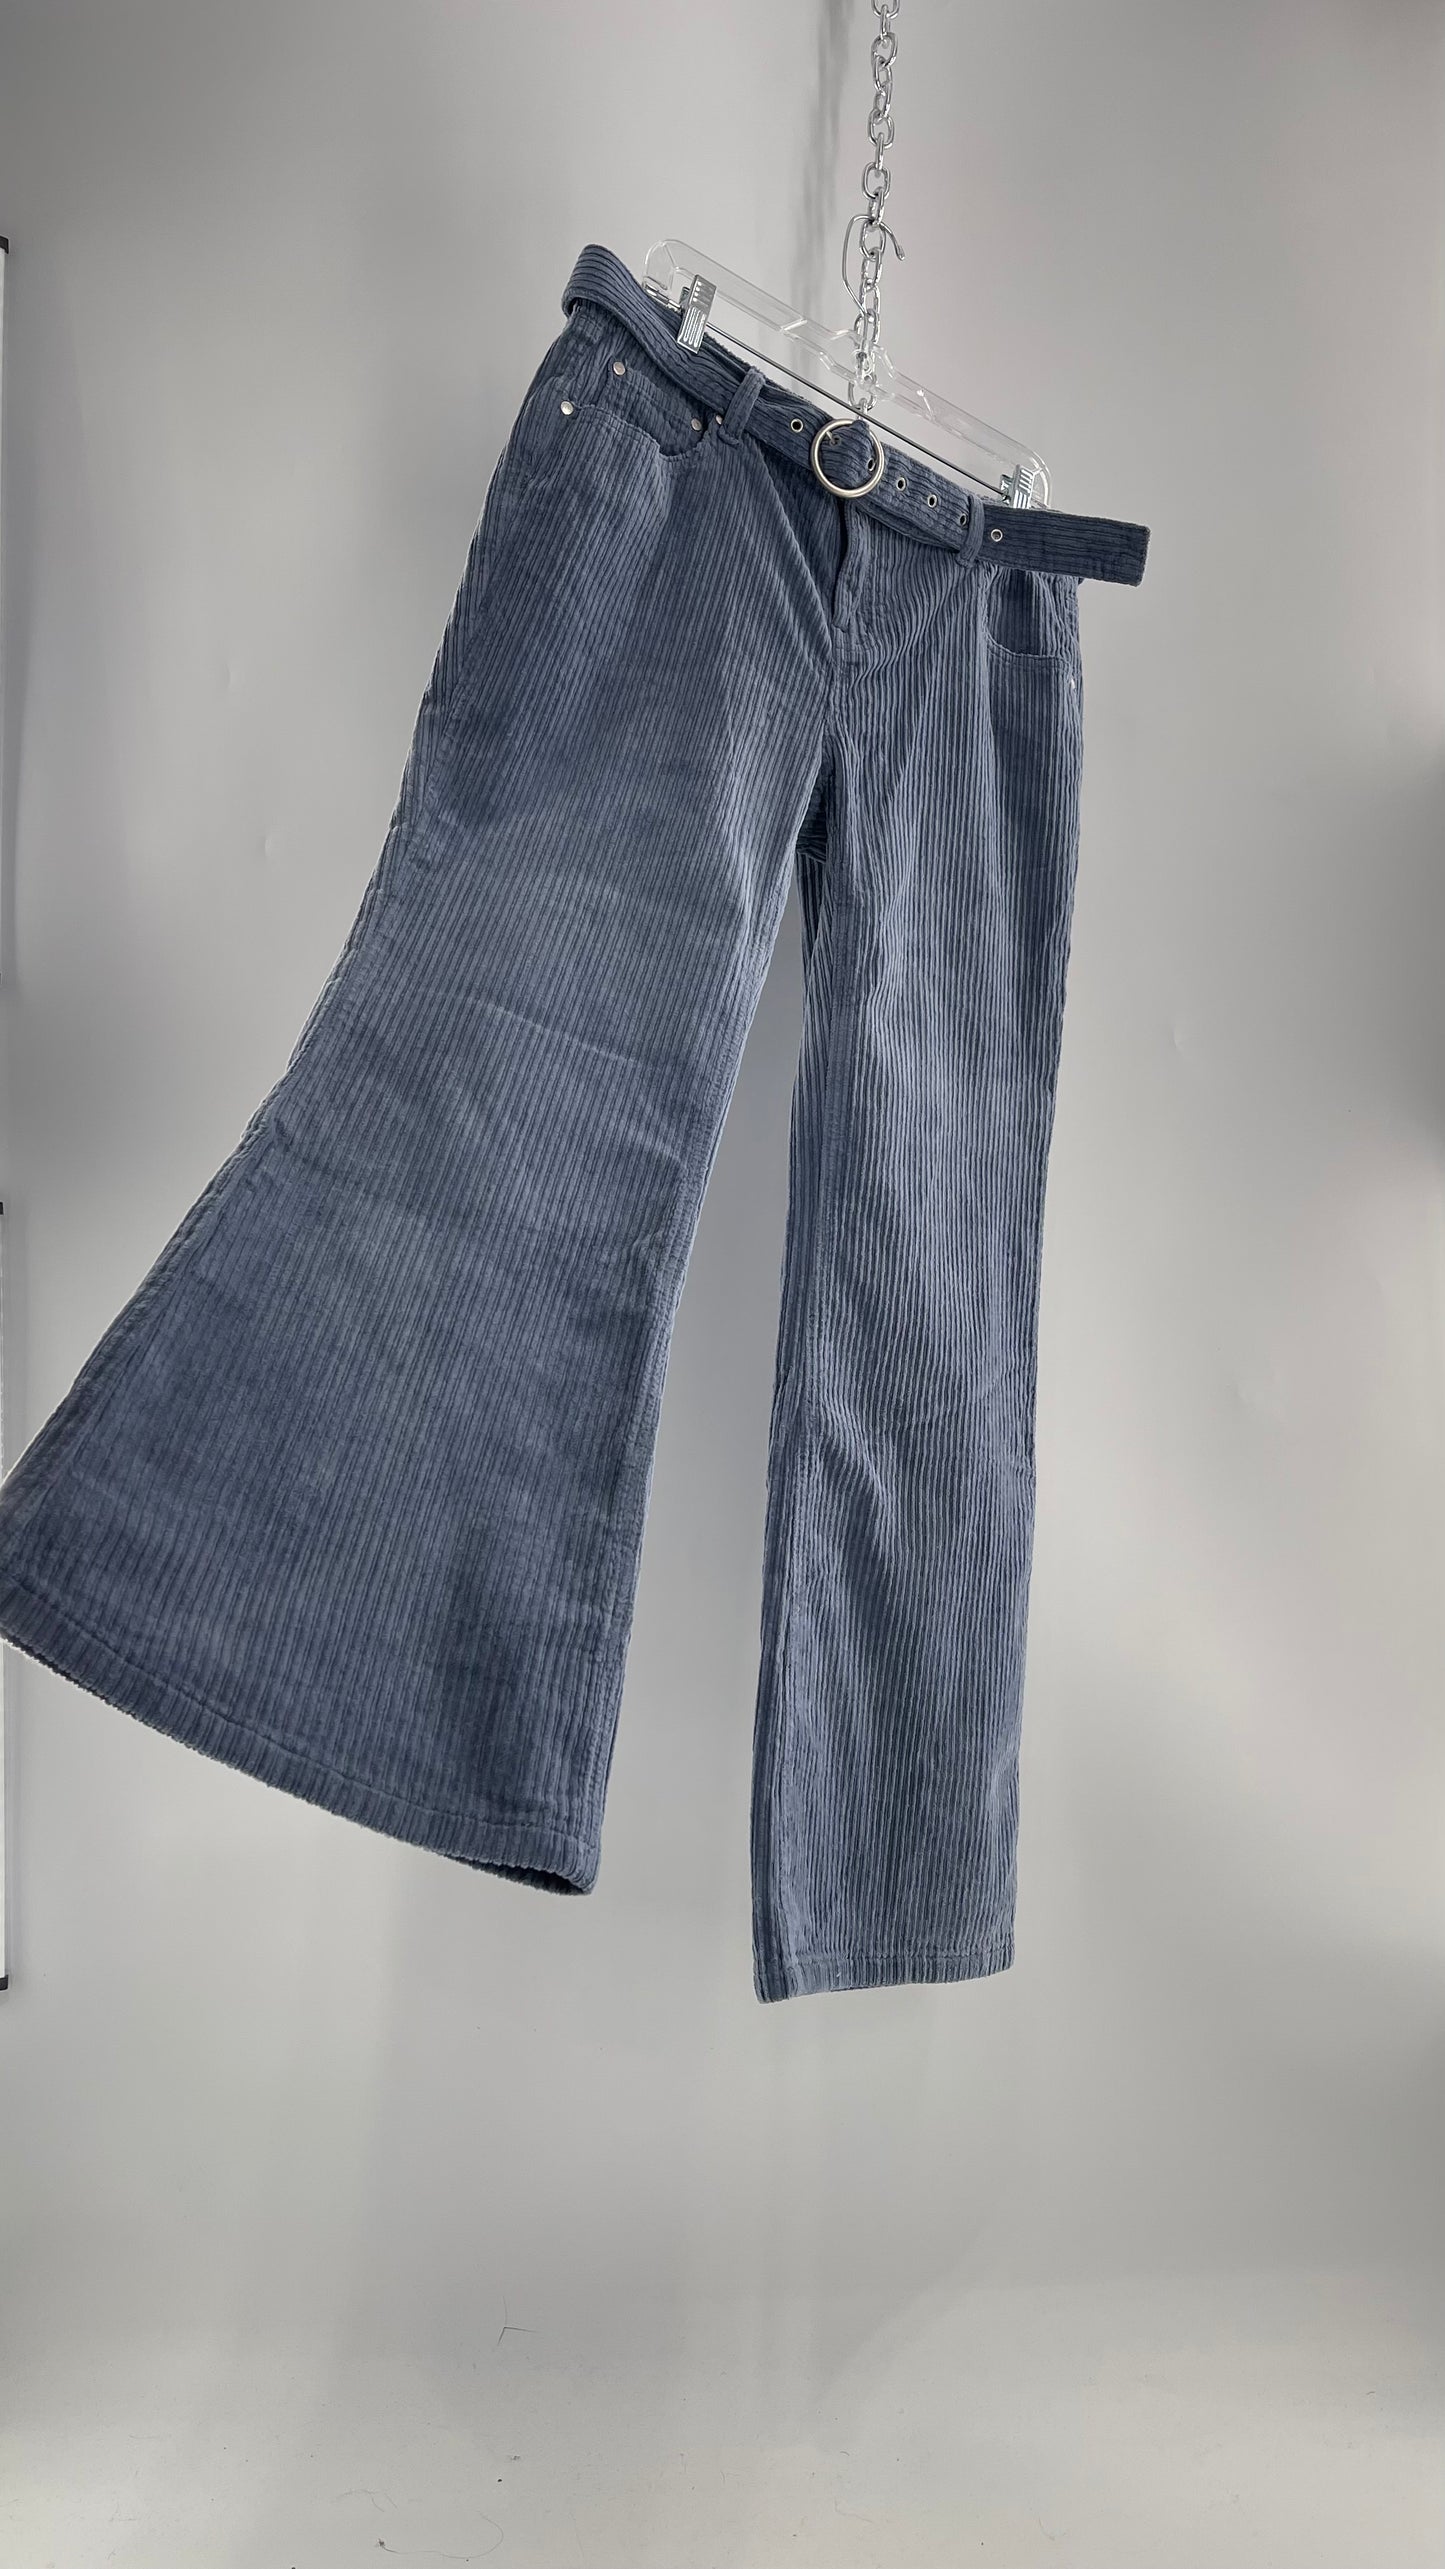 MILK IT Recycled Powder Blue Corduroy Low Waist Grommet Buckle Folk Jean with Tags Attached (16)